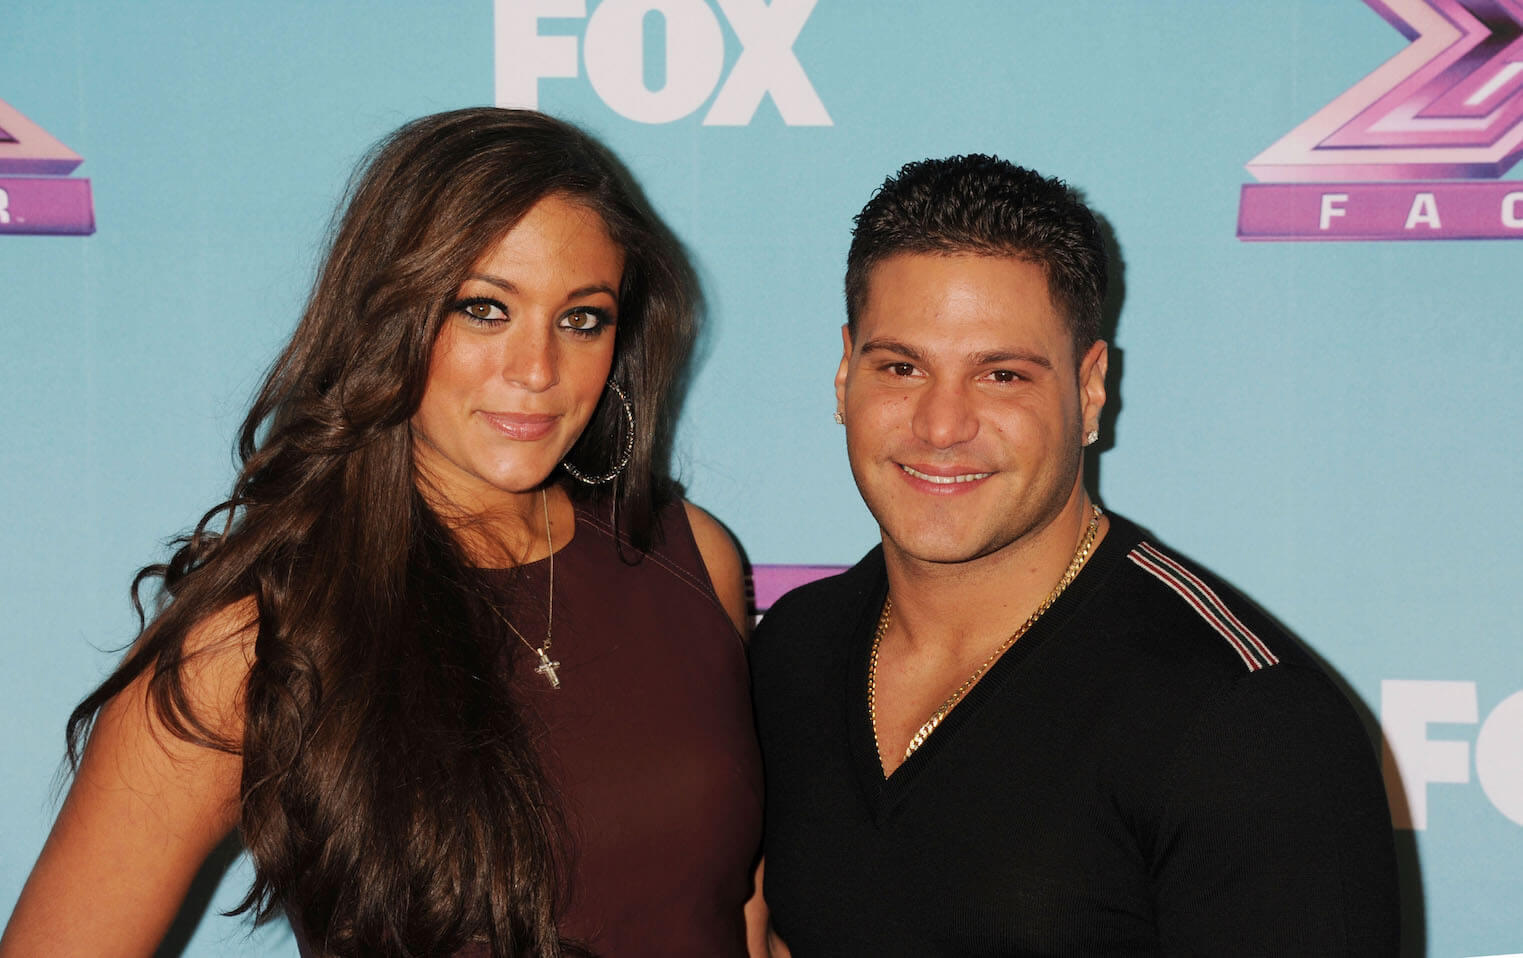 'Jersey Shore' cast members Sammi 'Sweetheart' Giancola and Ronnie Ortiz-Magro posing at a Fox event against a blue background